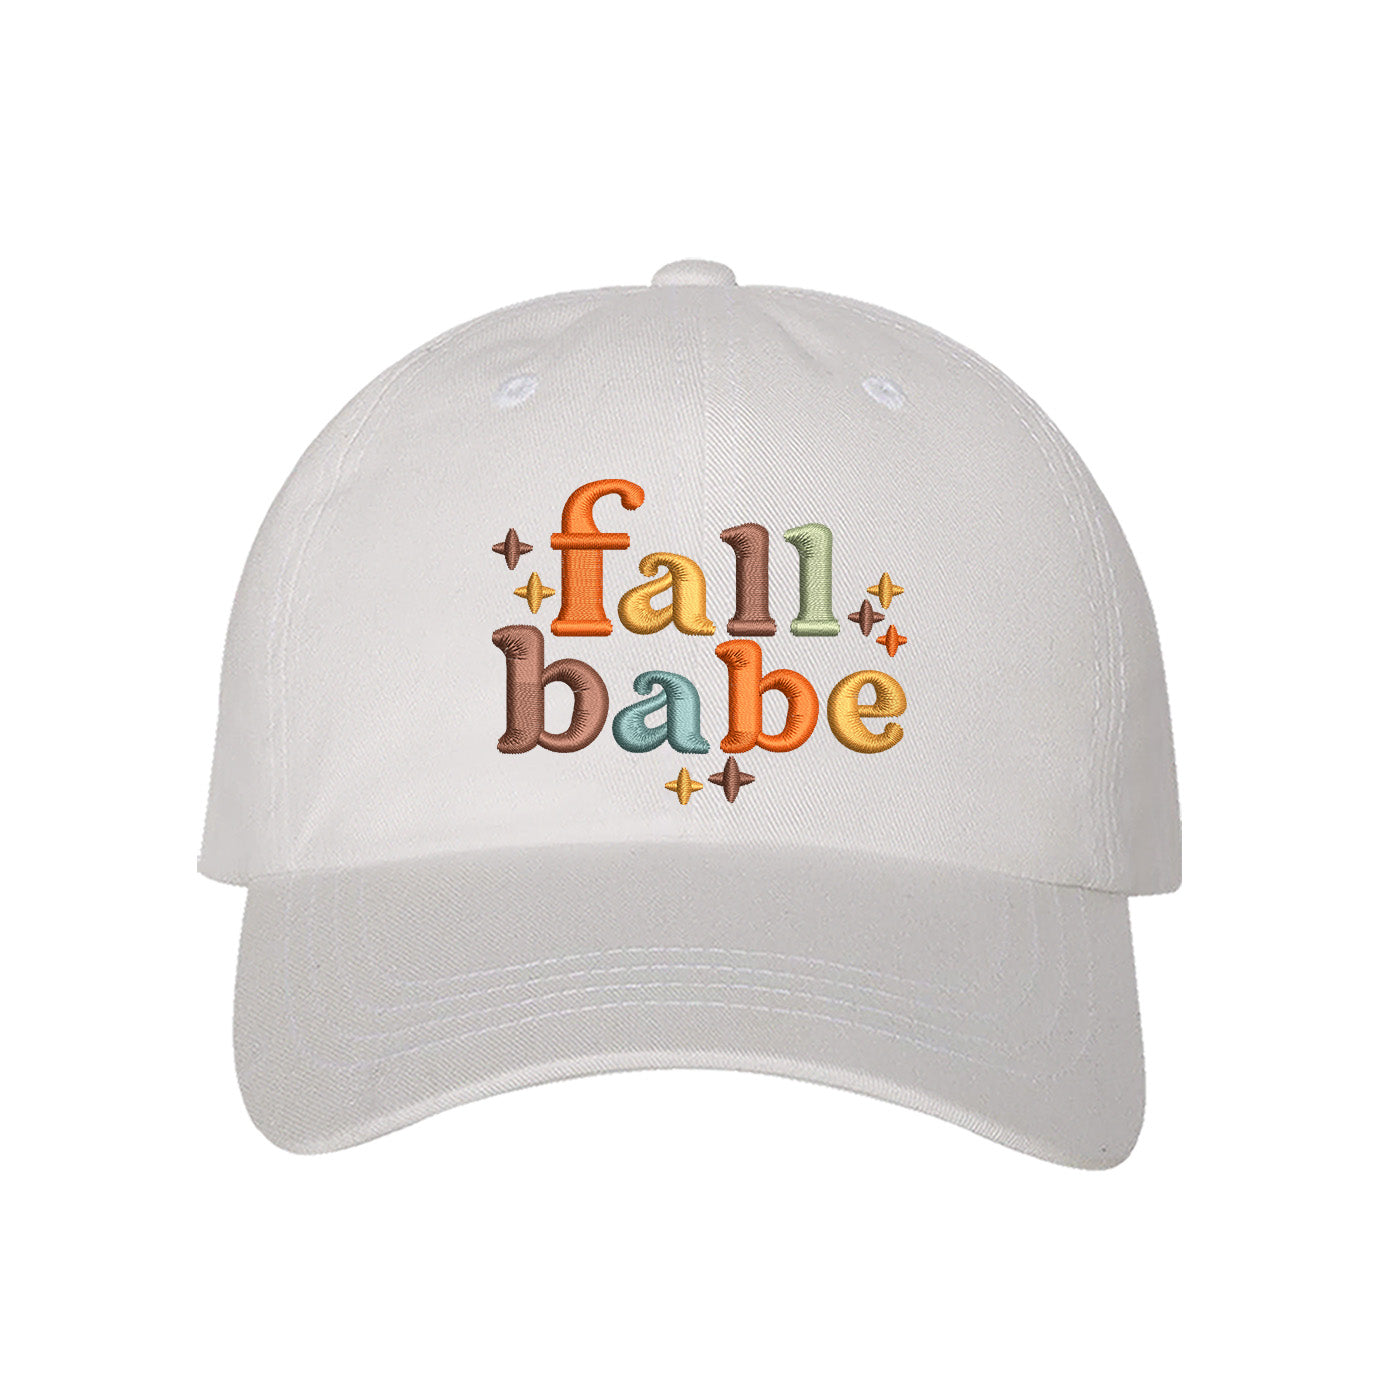 White Baseball cap embroidered with Fall Babe - DSY Lifestyle